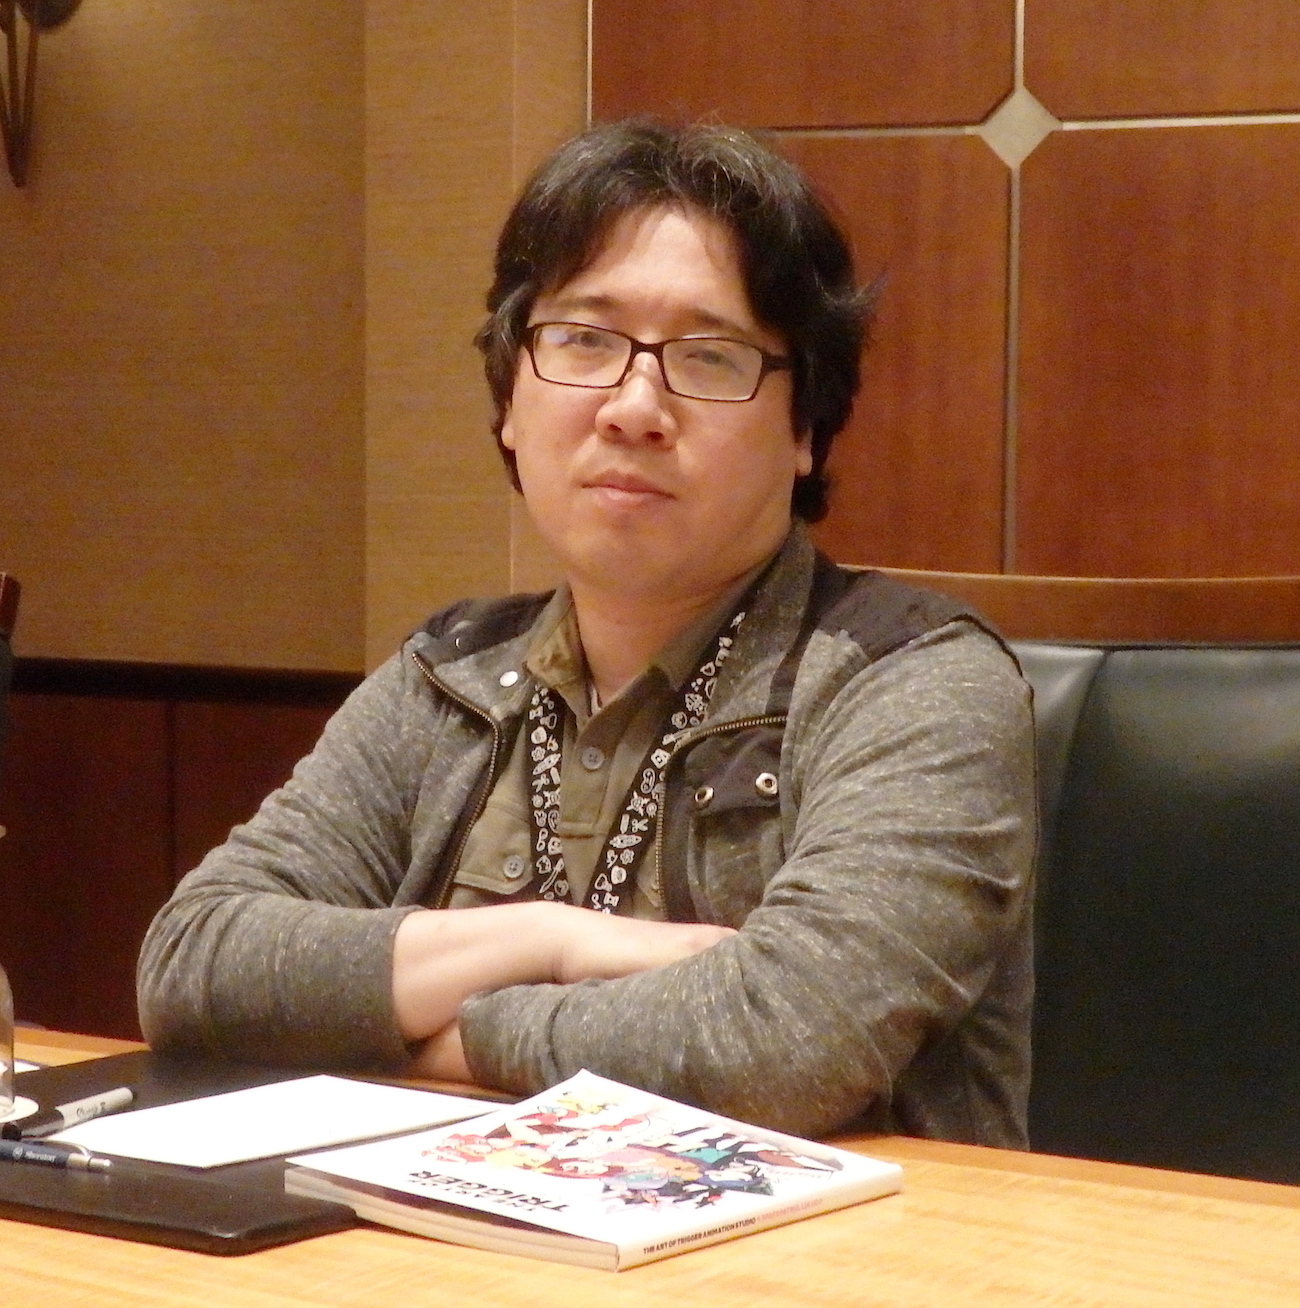 Yoshinari sitting at a table with his arms crossed.